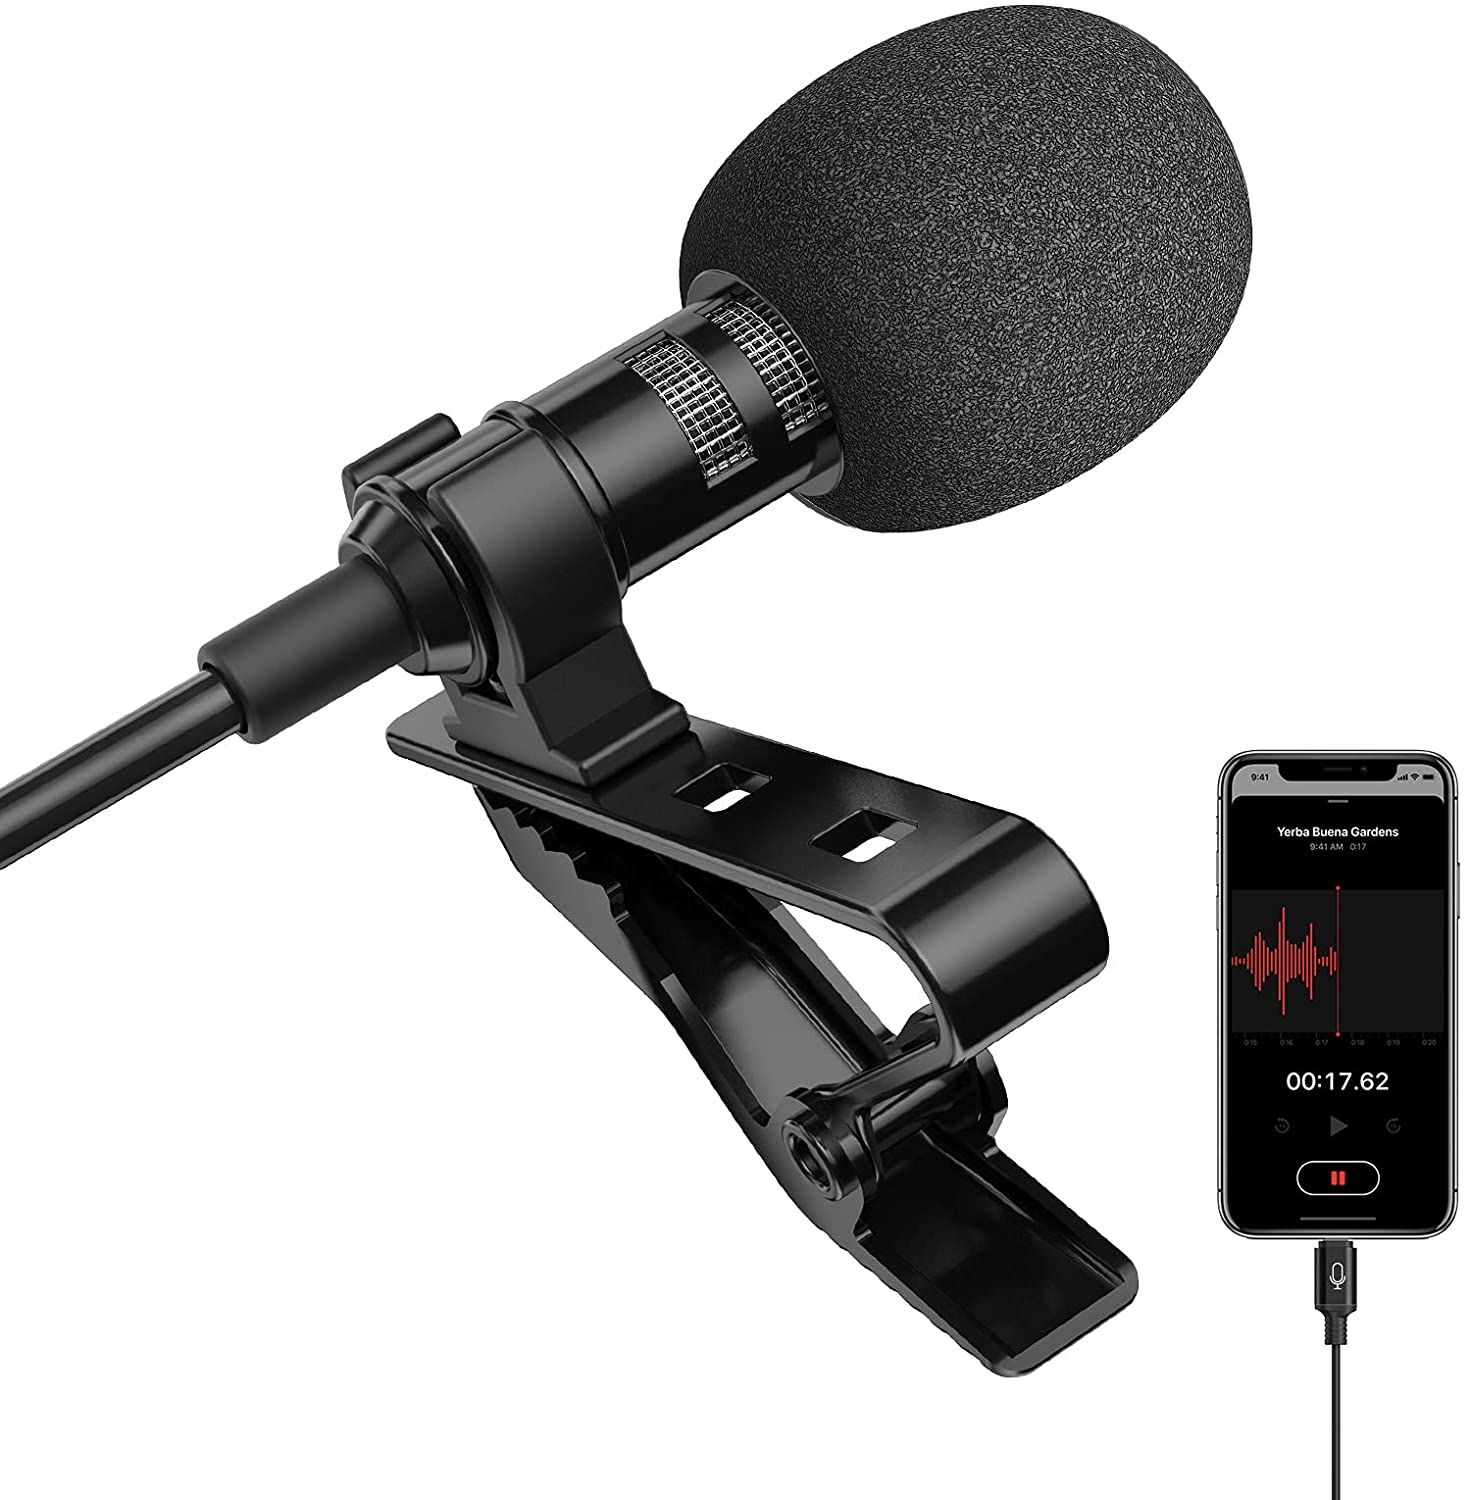 TTStar Lavalier Microphone Professional for iPhone